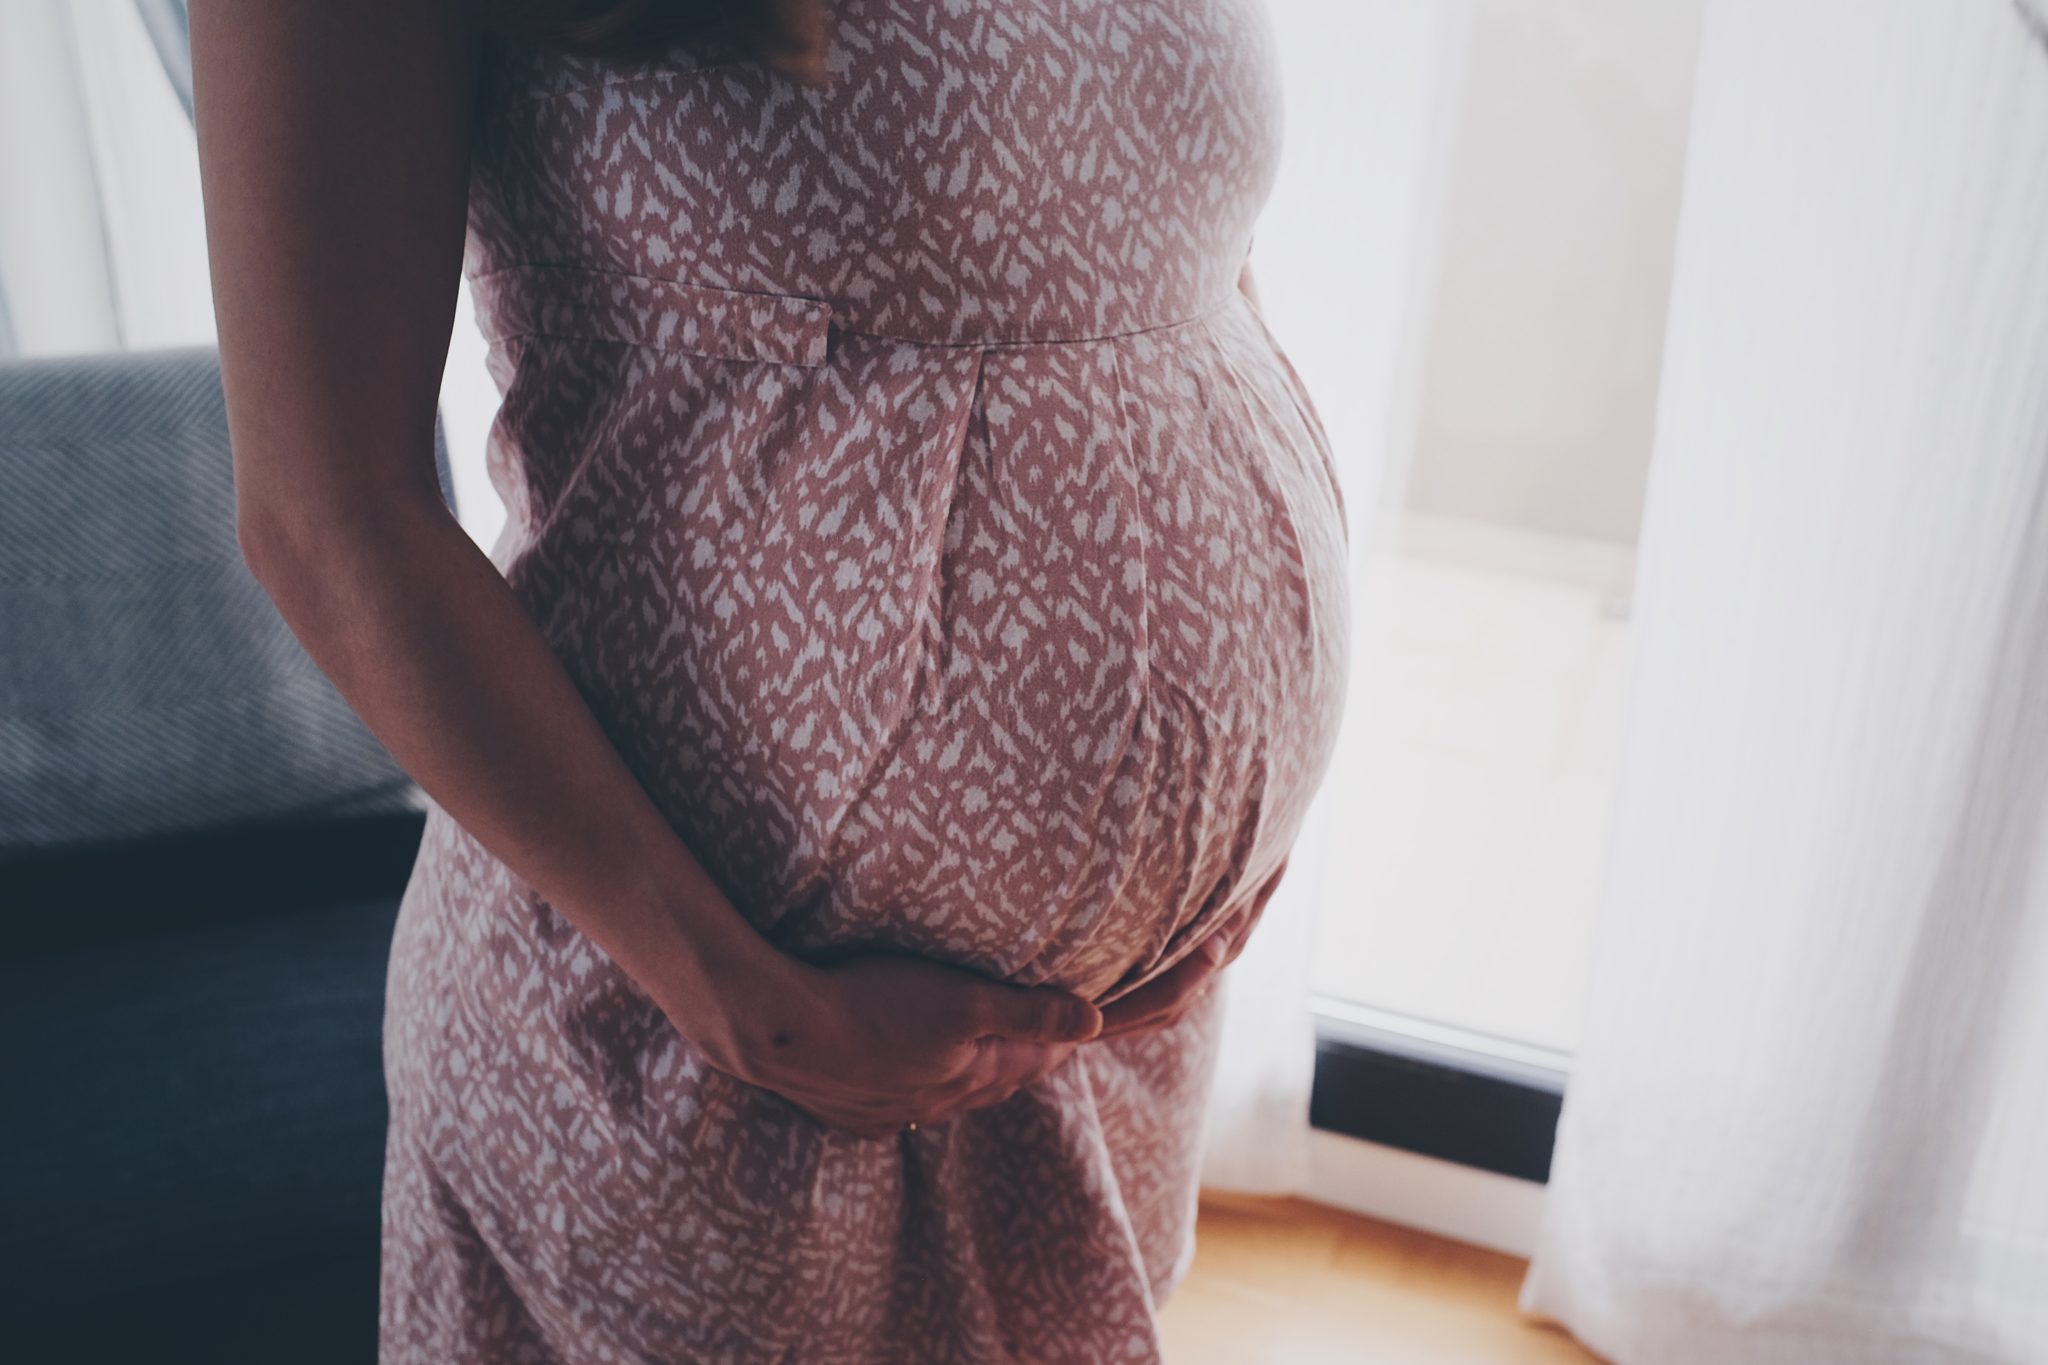 photo of a pregnant woman's torso, and she is clasping her hands below her belly